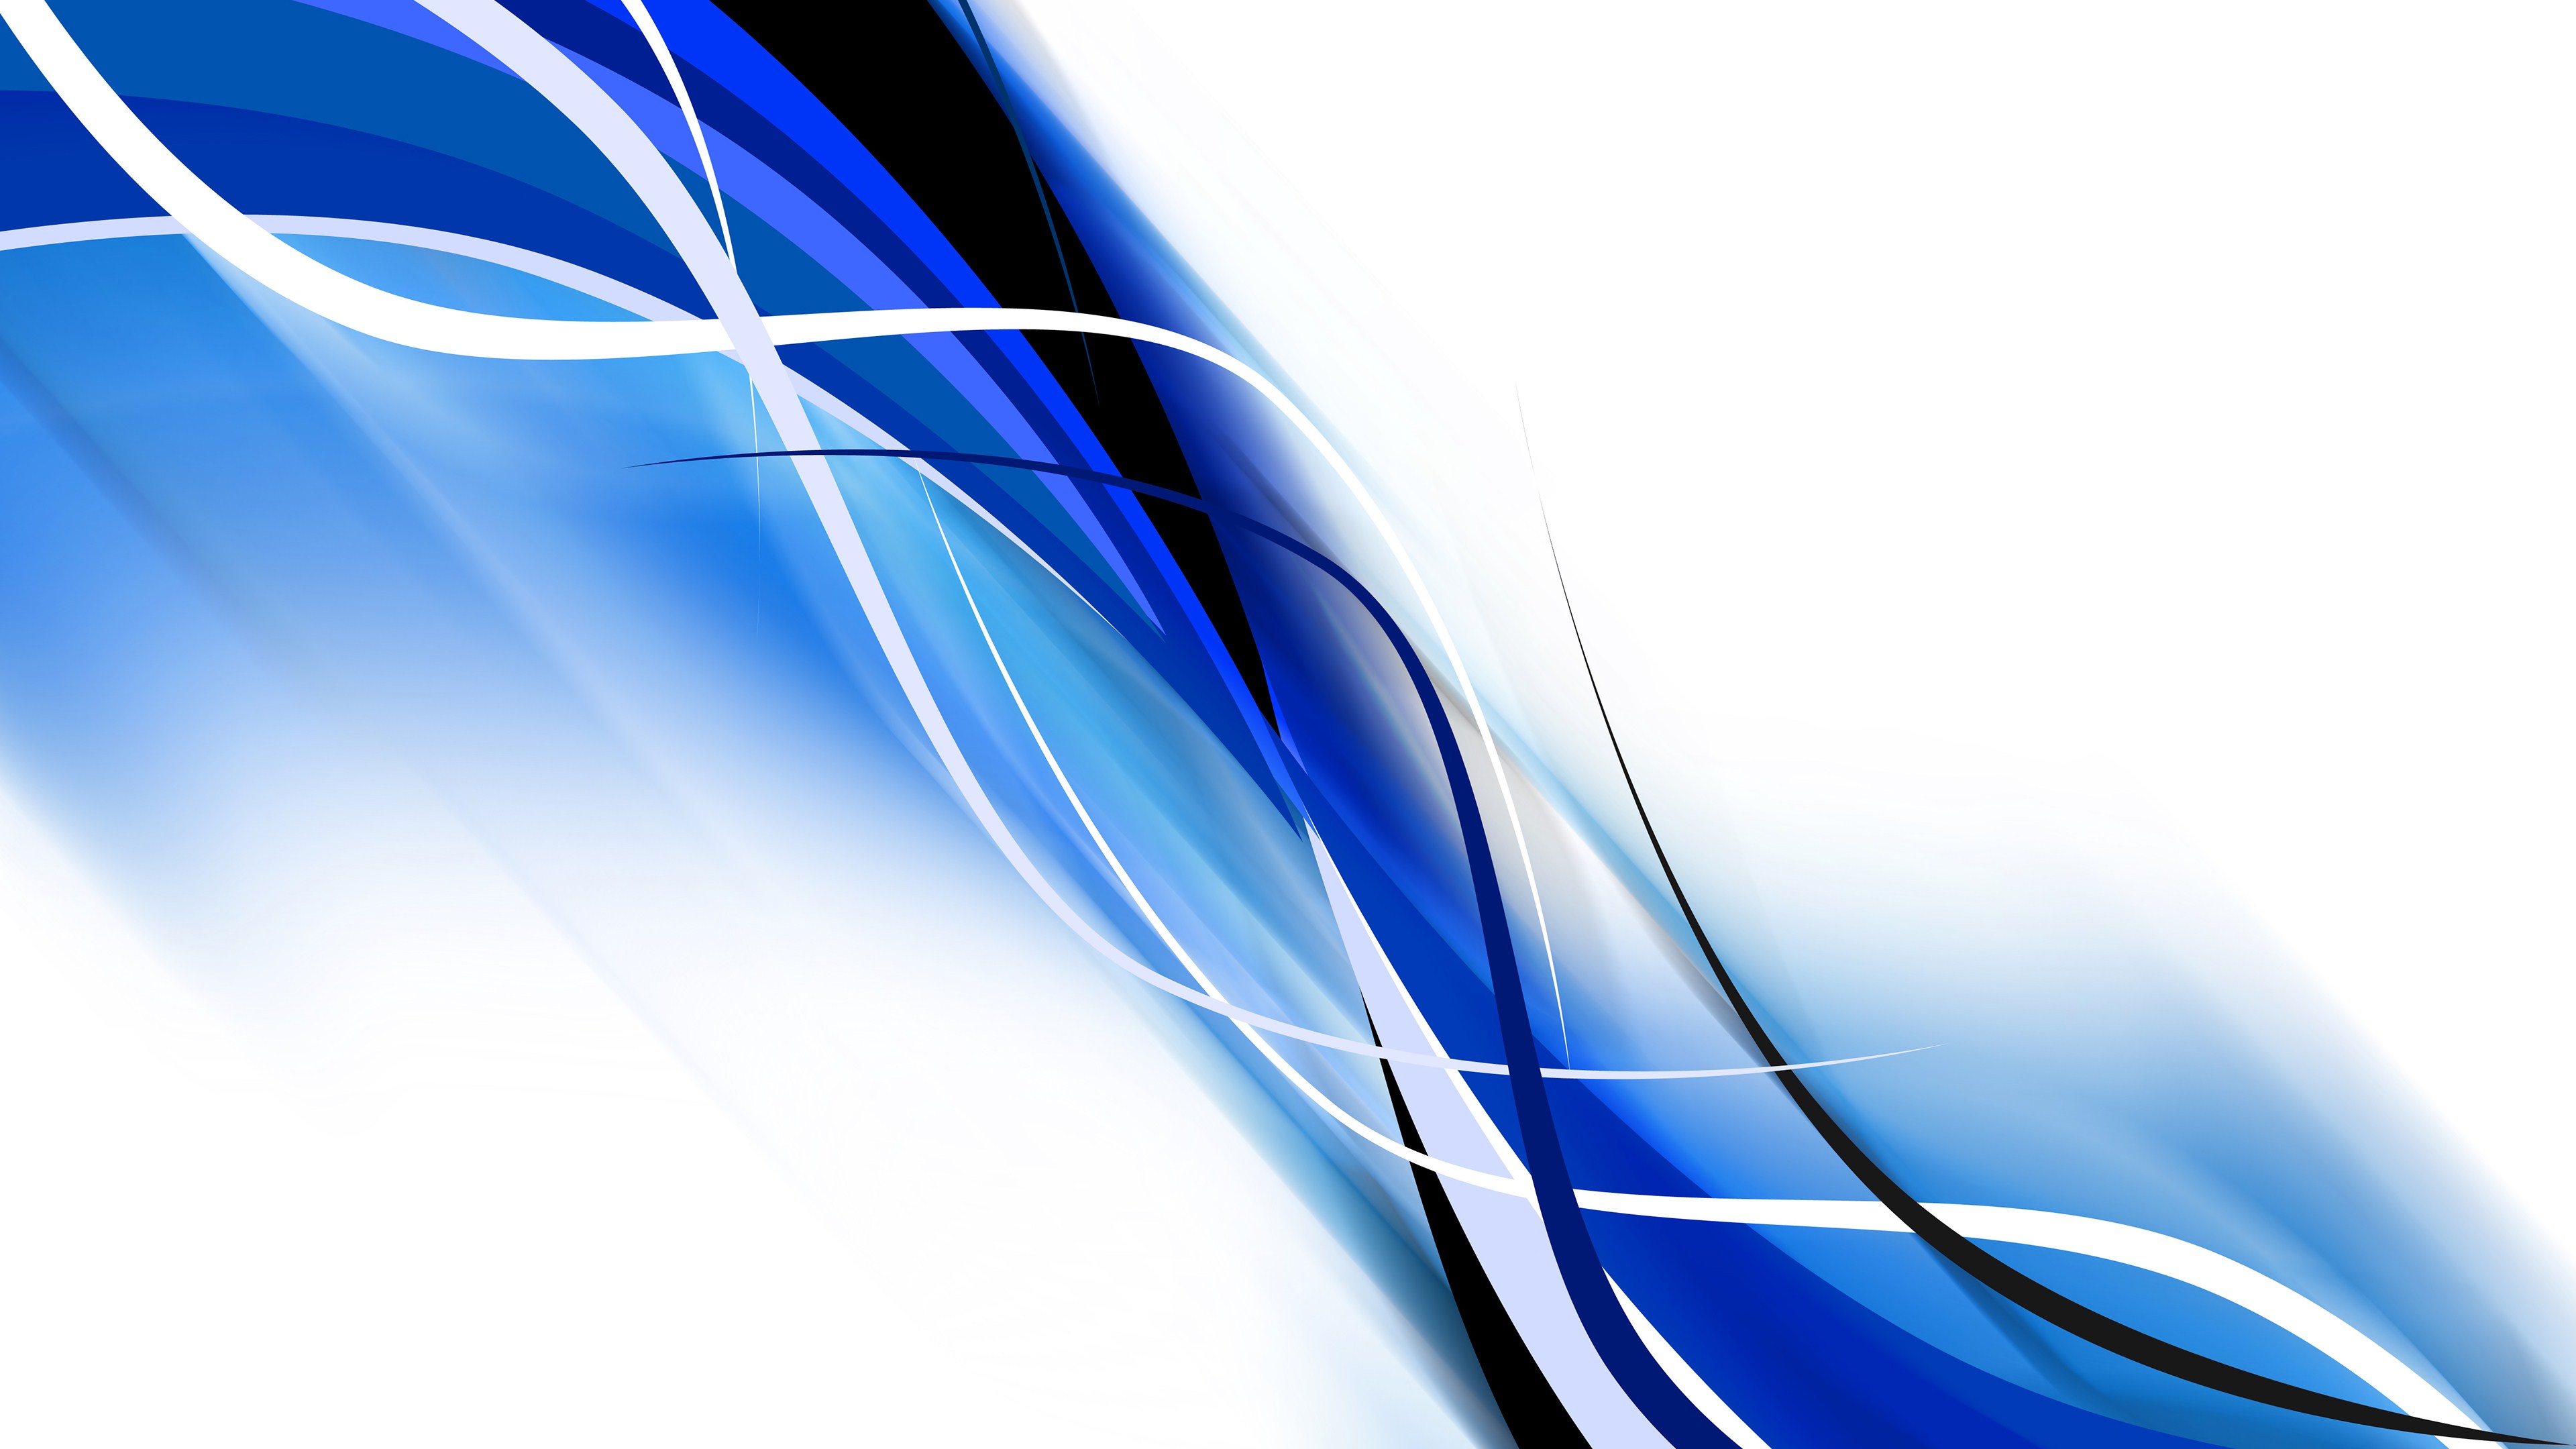 Abstract Wave Wallpaper